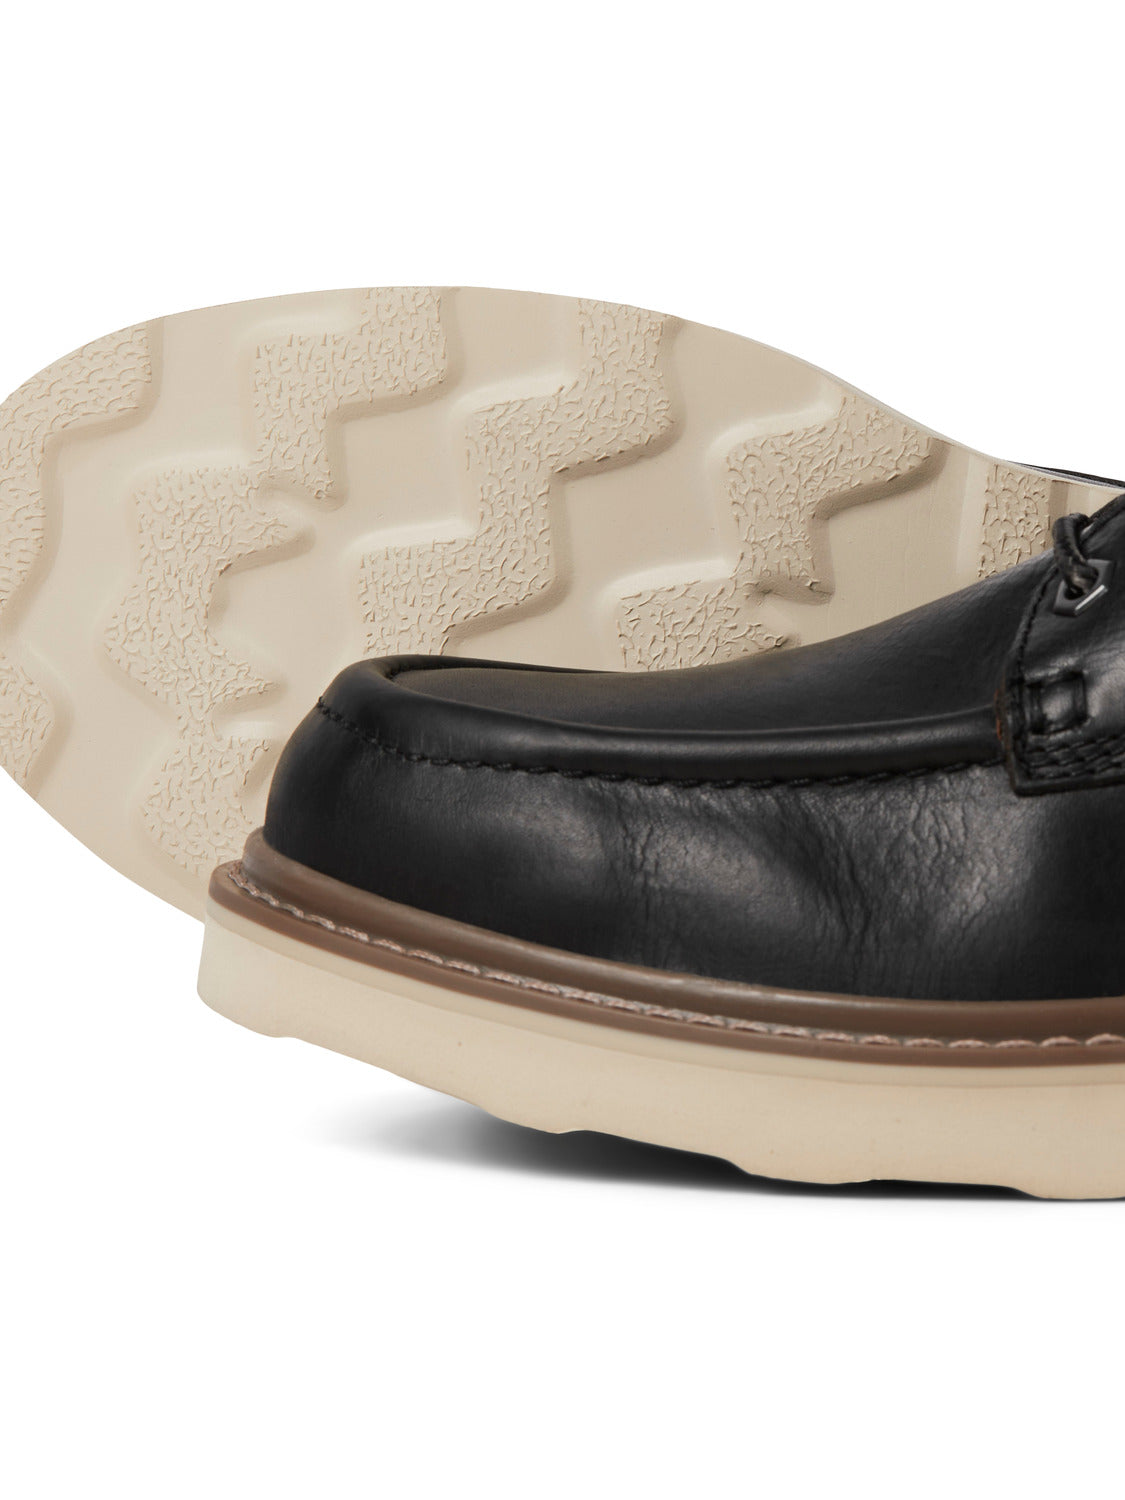 JFWALDGATE Shoes - Anthracite